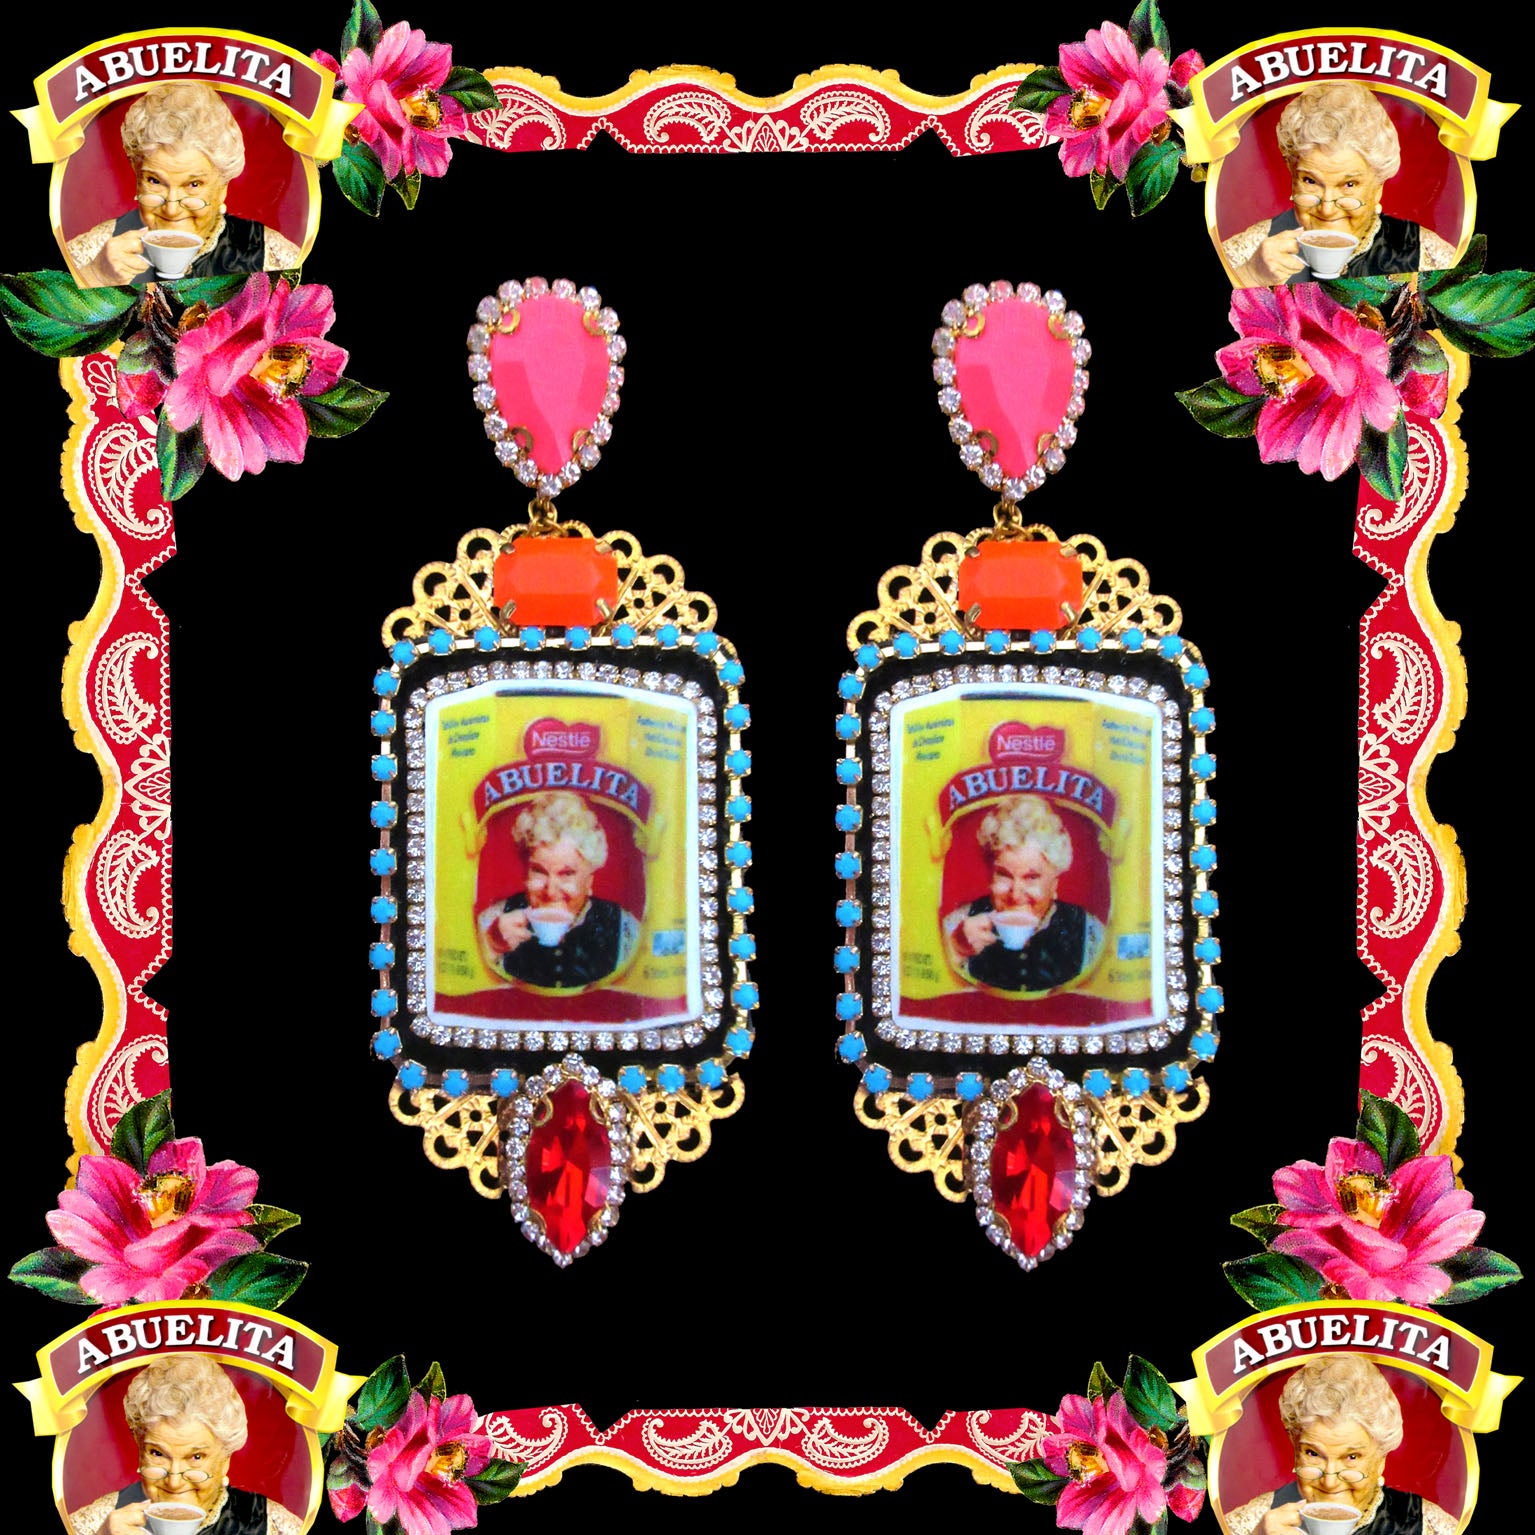 mouchkine jewelry handmade earrings pendant, an abuelita chic picture with red, pink and orange crystals. A luxury haute couture creation.